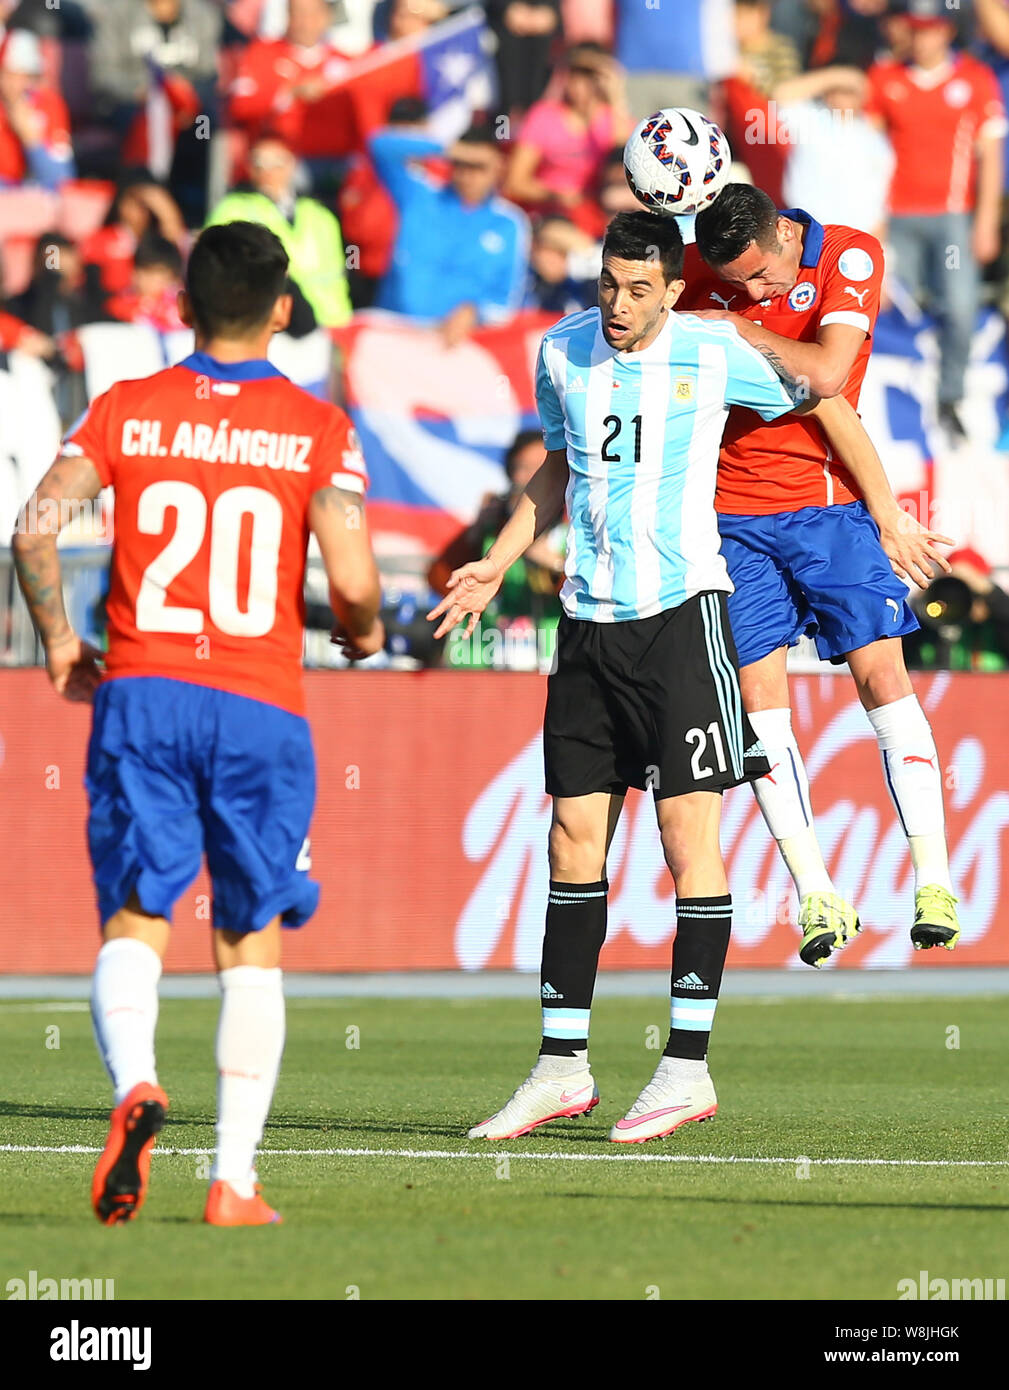 Argentina's Javier Pastore, center, and Chile's Mauricio Isla, right, head the ball during the Copa America 2015 final soccer match between Chile and Stock Photo